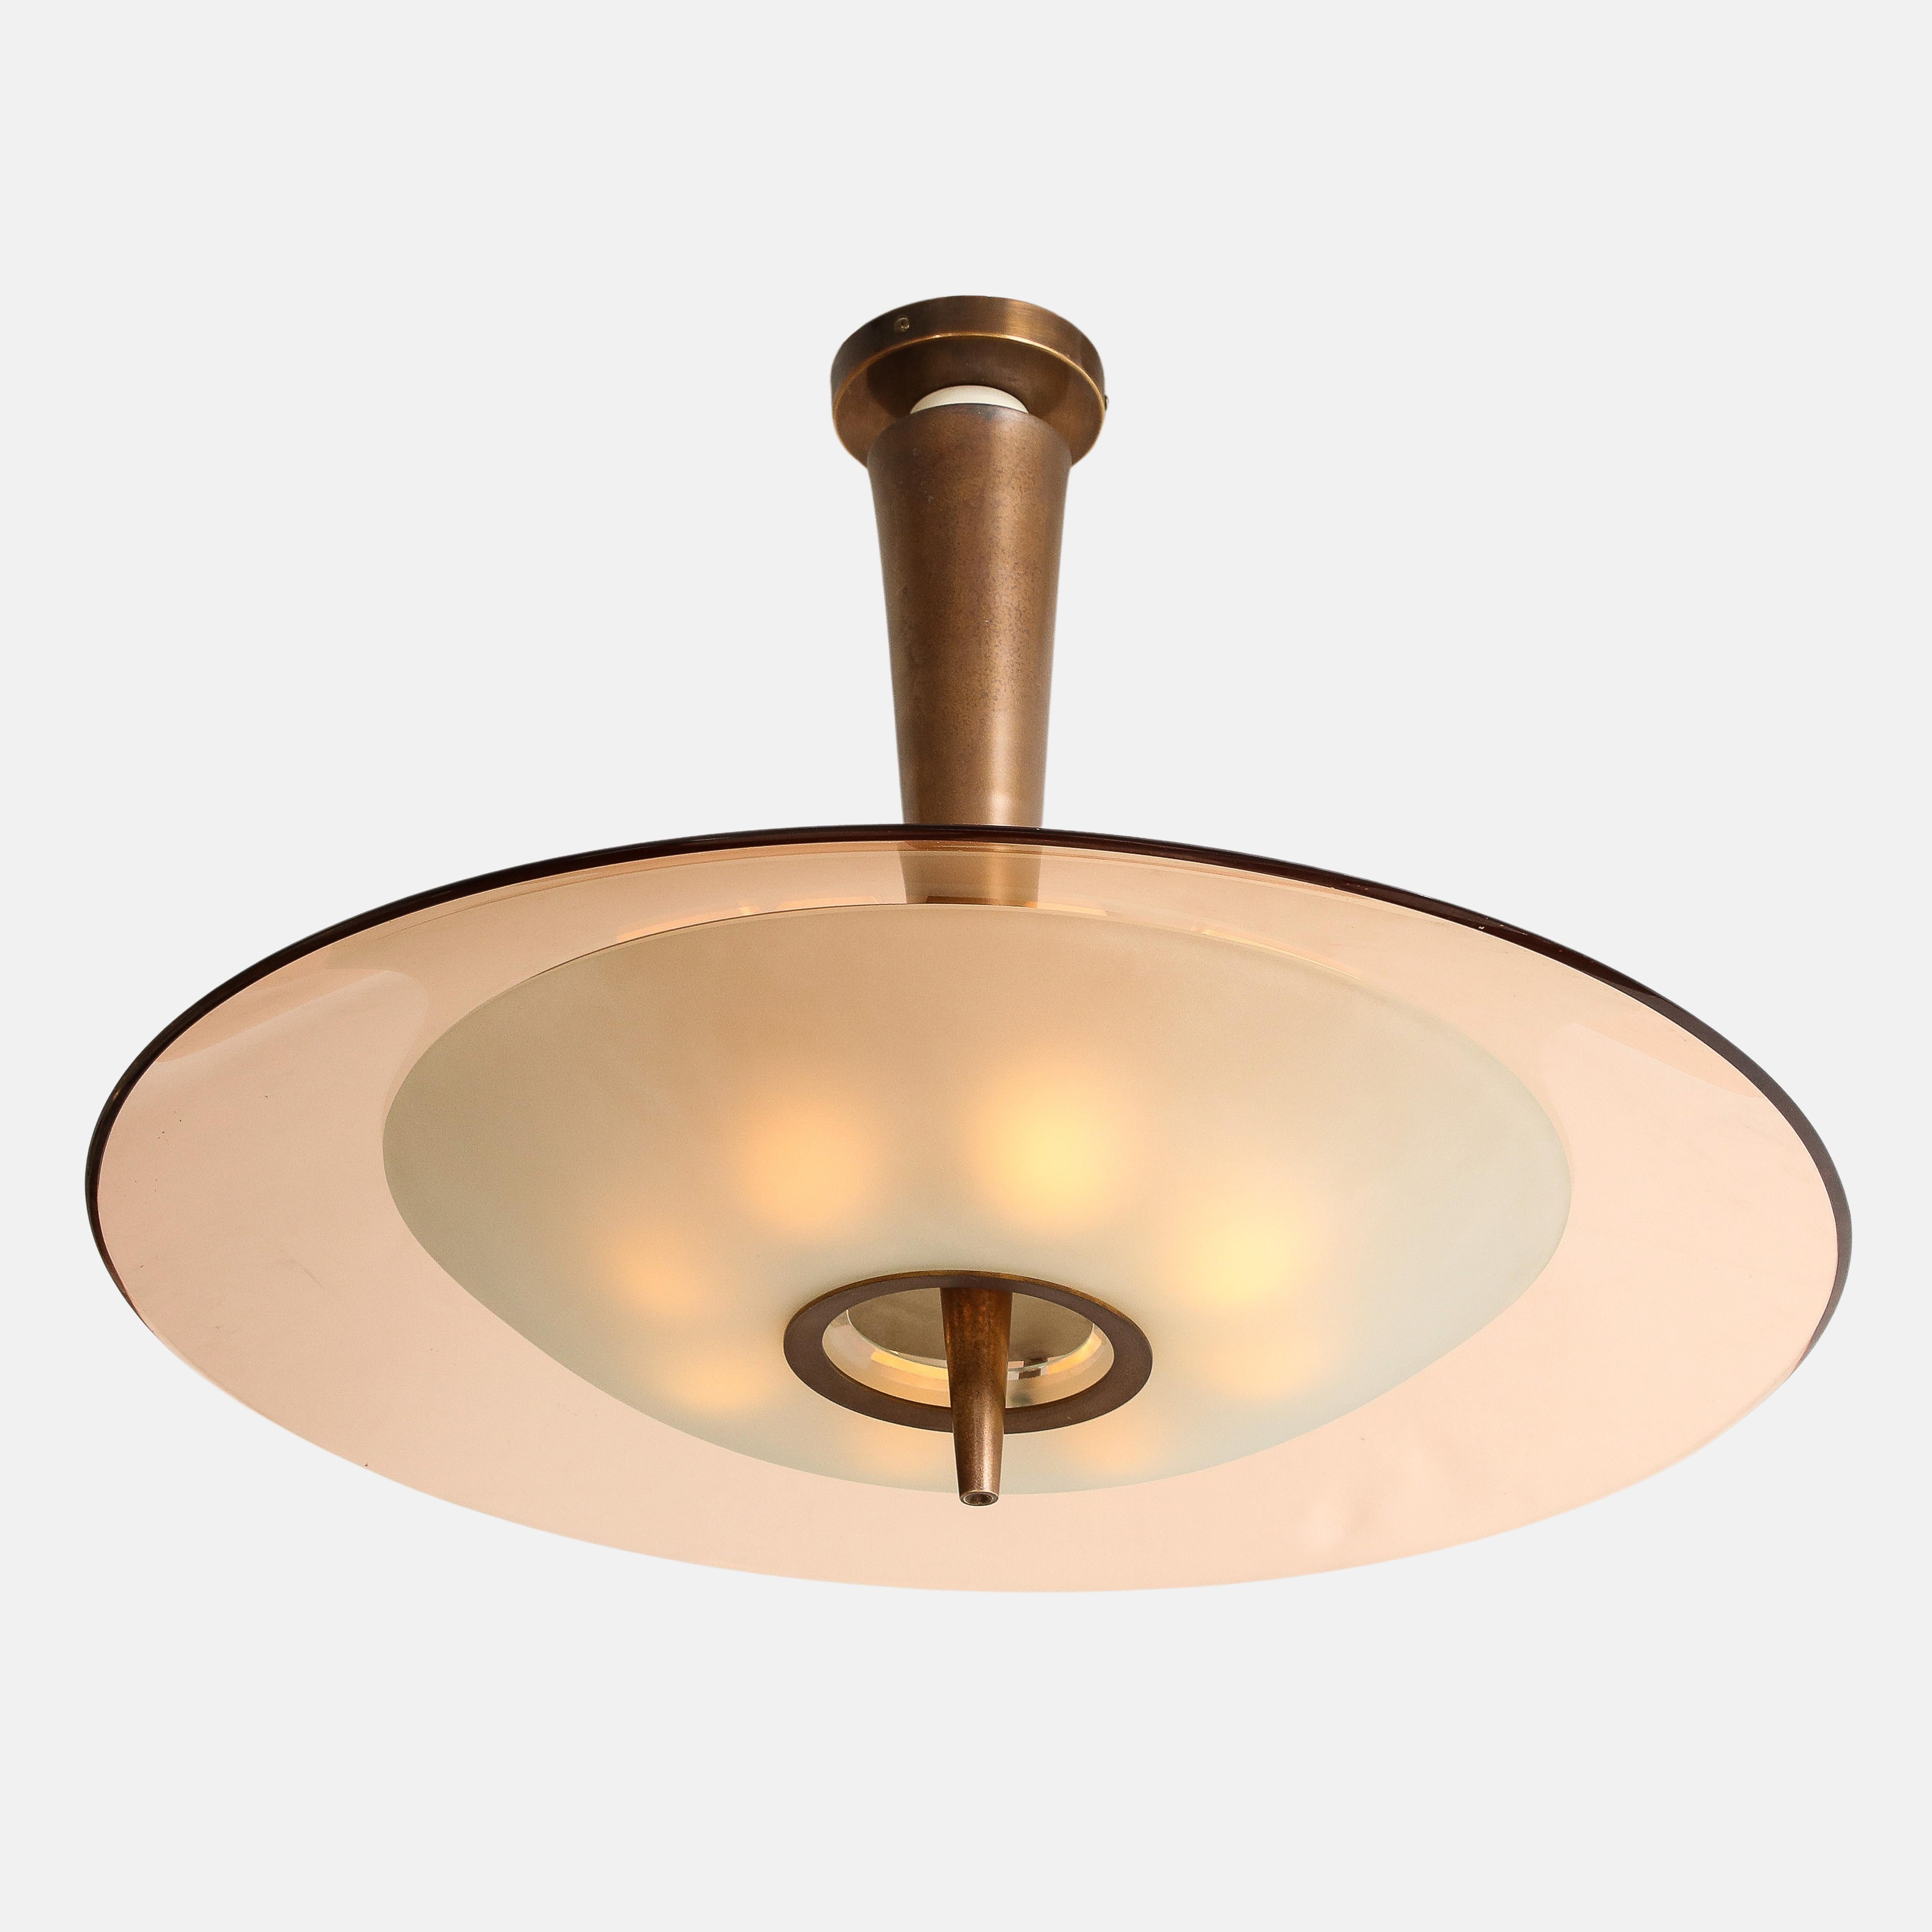 Max Ingrand for Fontana Arte chandelier or pendant light model 1462 consisting of large rose beveled and polished crystal glass disc and smaller frosted glass diffuser mounted on tapering lacquered brass stem.  
This exquisite ceiling light has 8